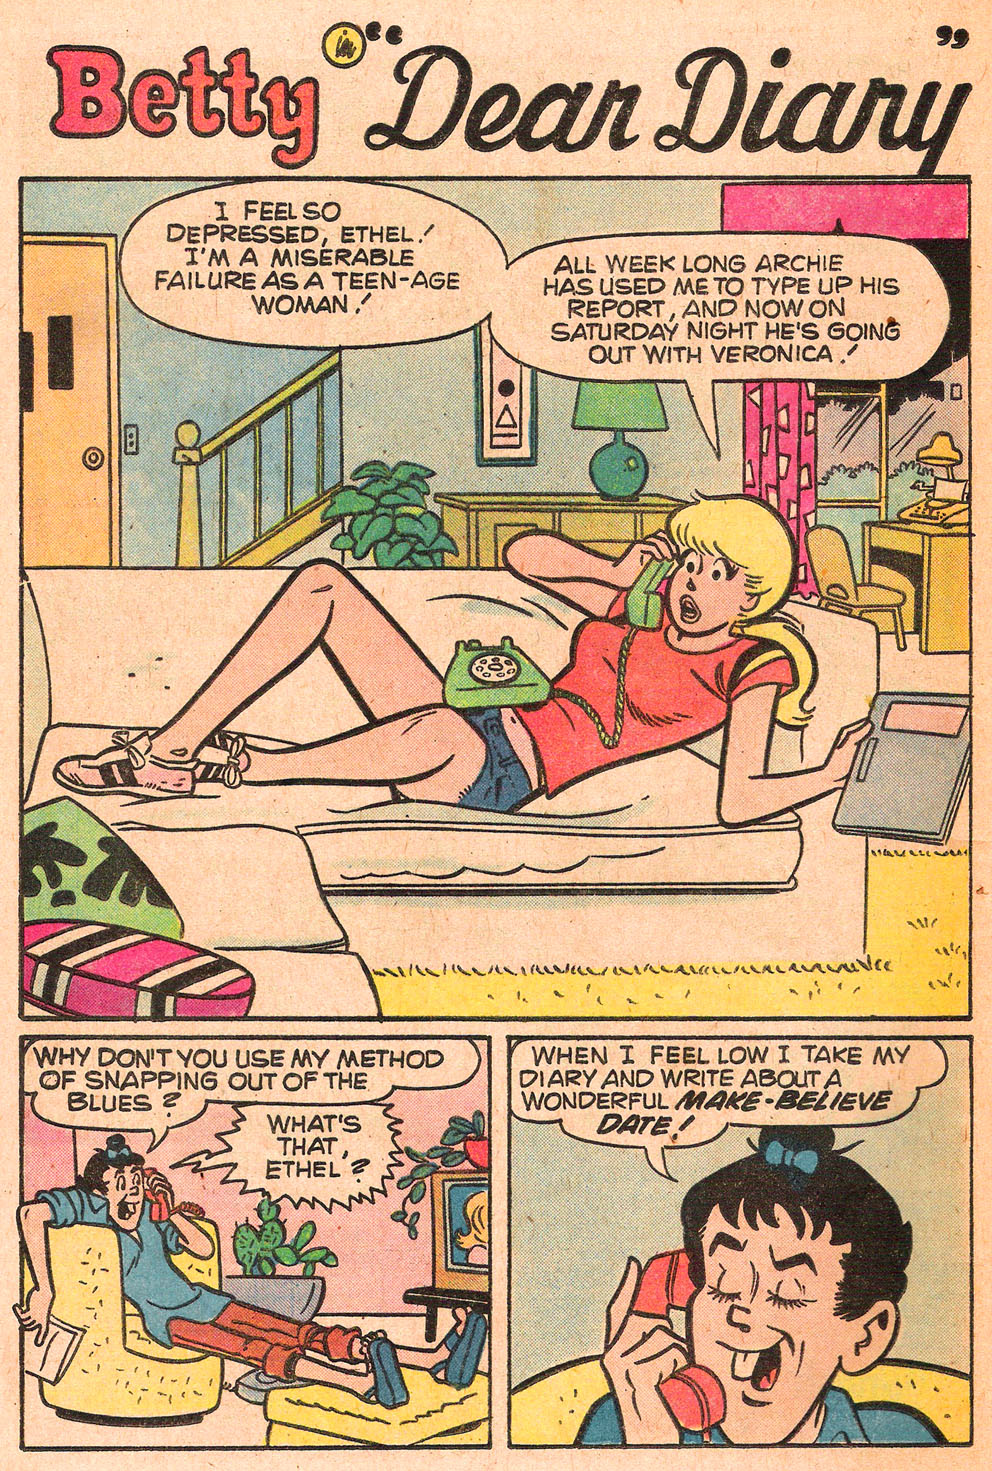 Read online Archie's Girls Betty and Veronica comic -  Issue #271 - 20